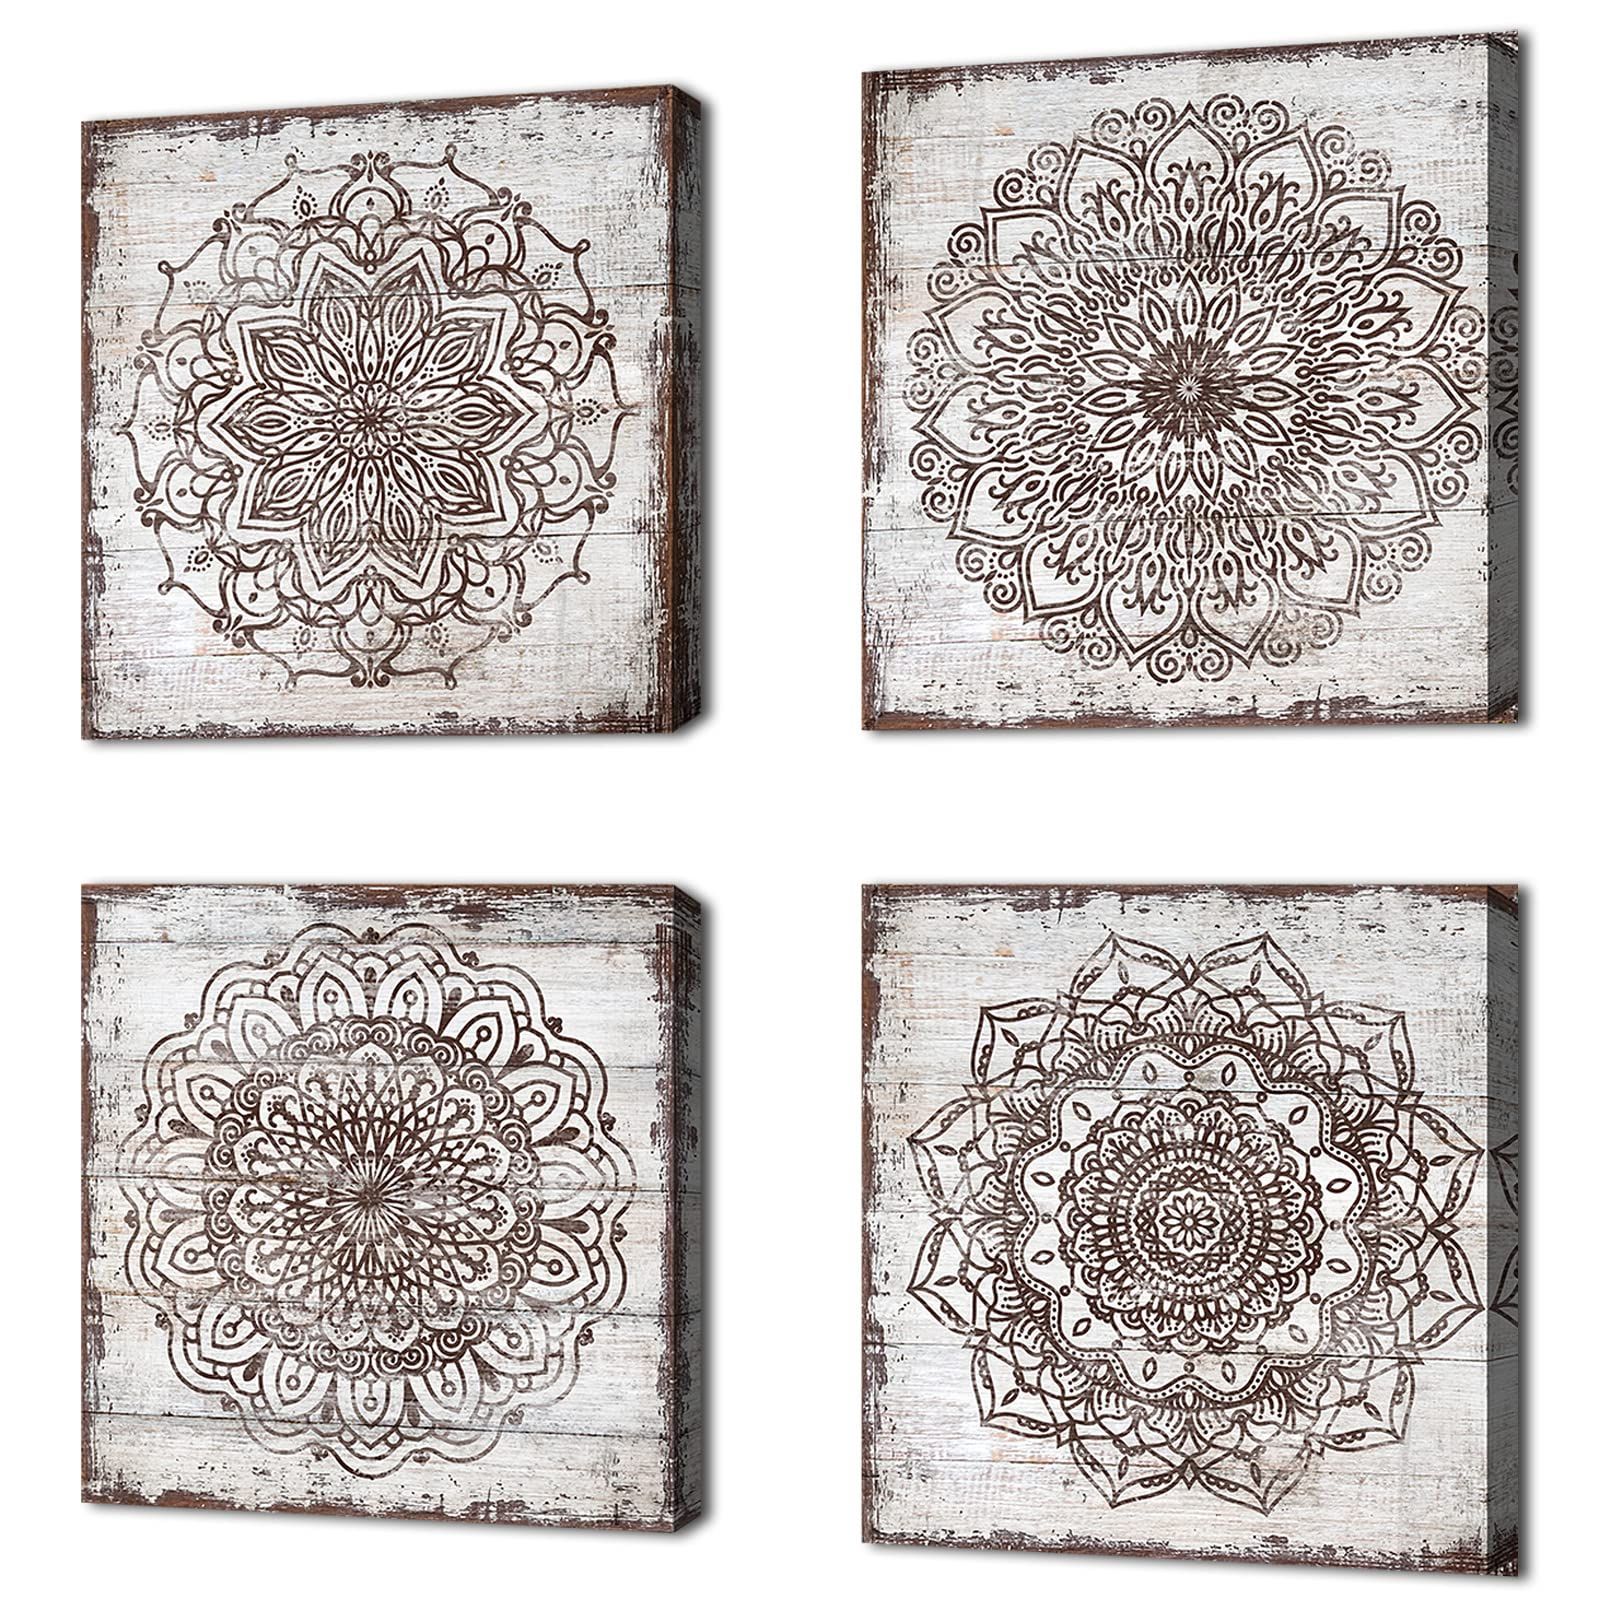 Most Recent Vintage Rust Wall Art Inside Amazon: Vintage Flower Pattern Canvas Wall Art For Bedroom Wall Decor  Rustic Bohe Floral Pictures Rust Geometric Wood Planks Canvas Prints Artwork  For Bathroom Office Home Decoration 12" X 12" X  (View 13 of 15)